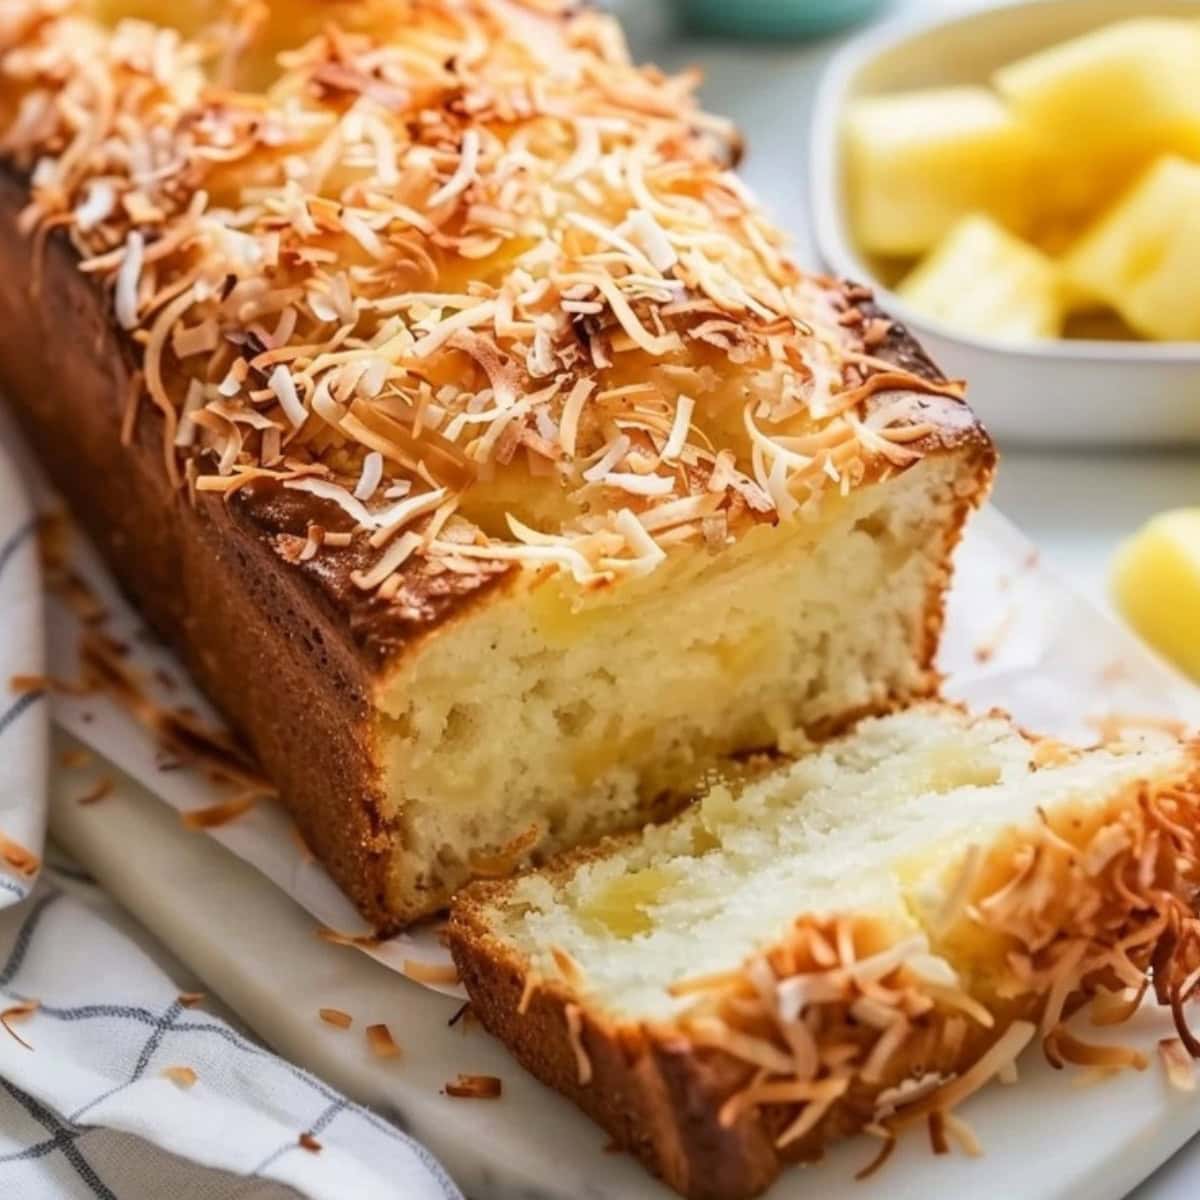 Pineapple loaf bread with toasted. coconut sliced on a cutting board.